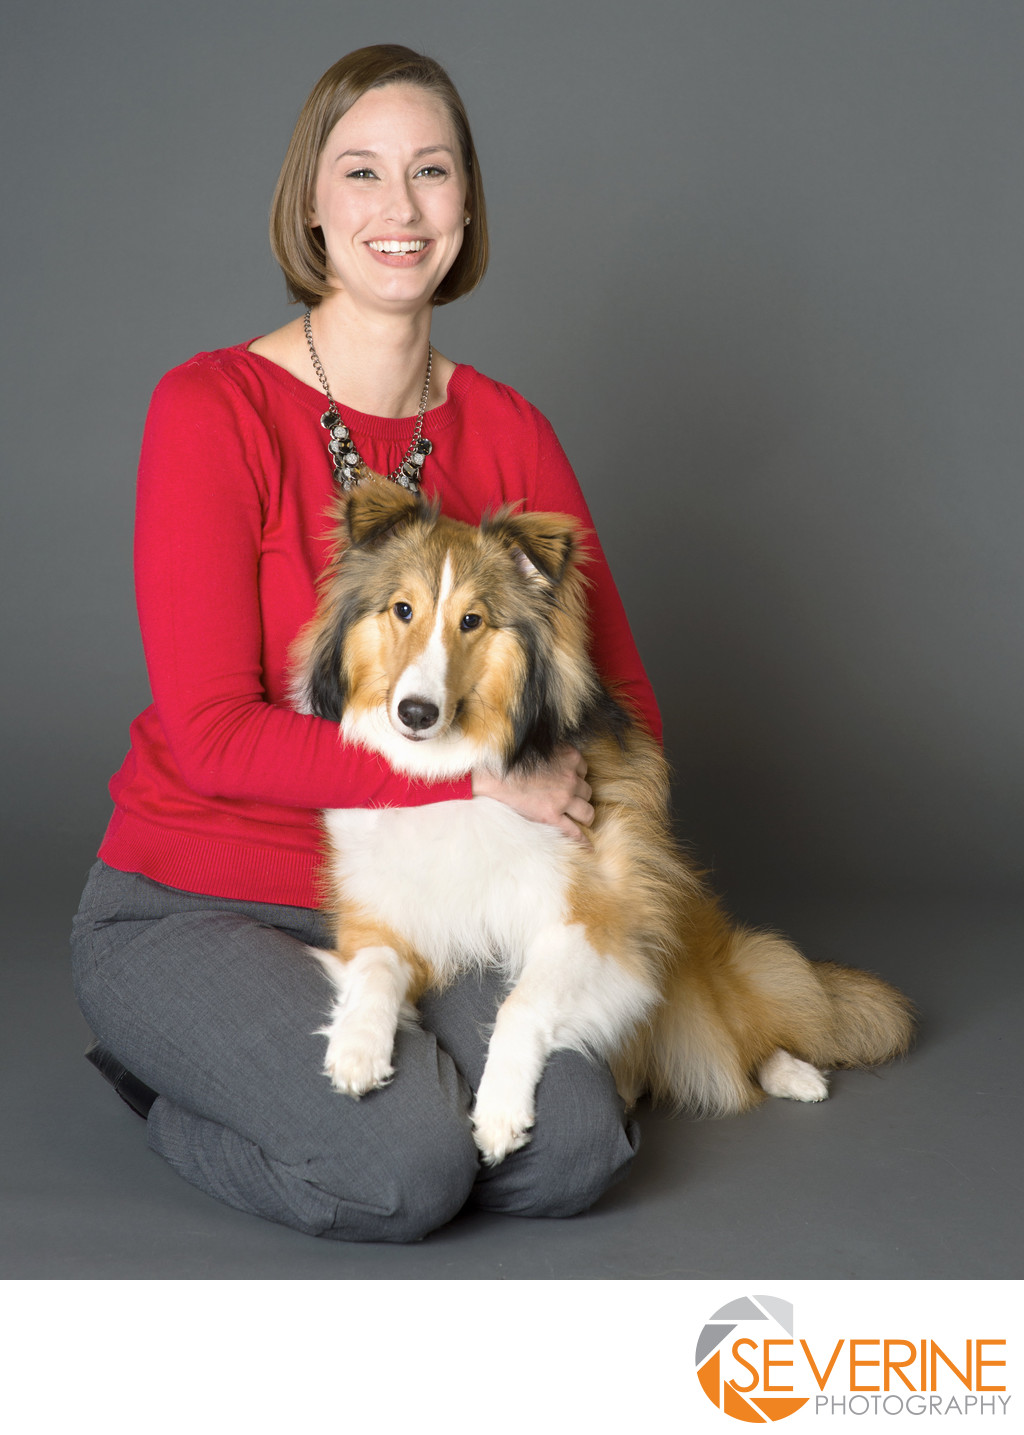 professional portrait for veterinarian and their pets